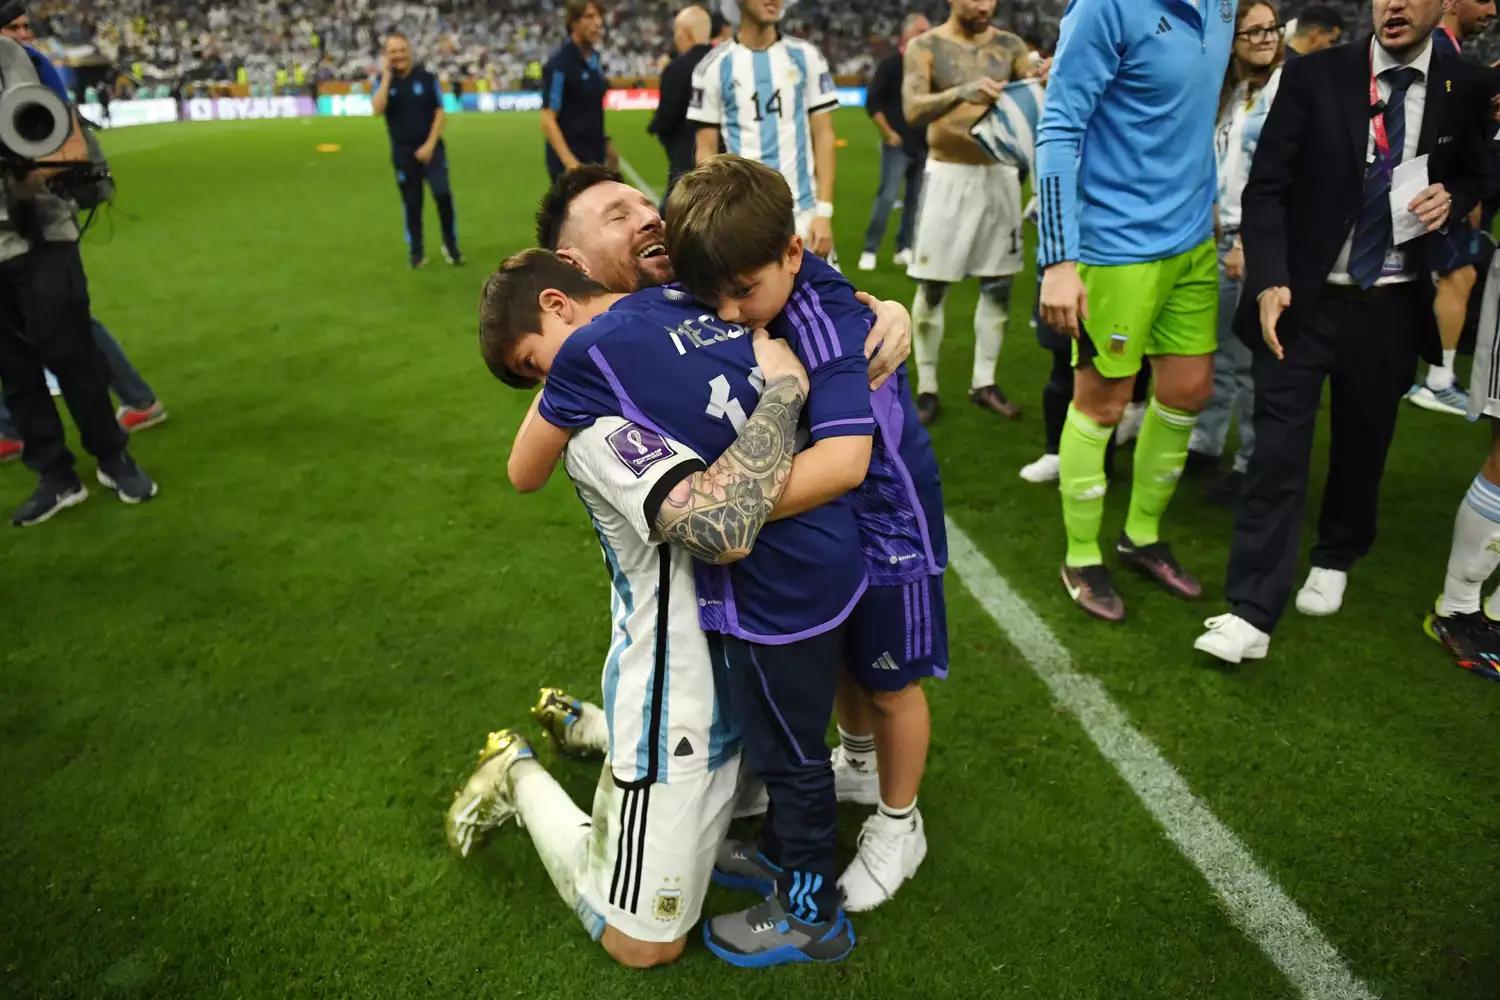 LUSAIL CITY, QATAR - DECEMBER 18: Lionel Messi of Argentina celebrates with his children after the victory in the penalty shoot out during the FIFA World Cup Qatar 2022 Final match between Argentina and France at Lusail Stadium on December 18, 2022 in Lusail City, Qatar. (Photo by David Ramos - FIFA/FIFA via Getty Images)